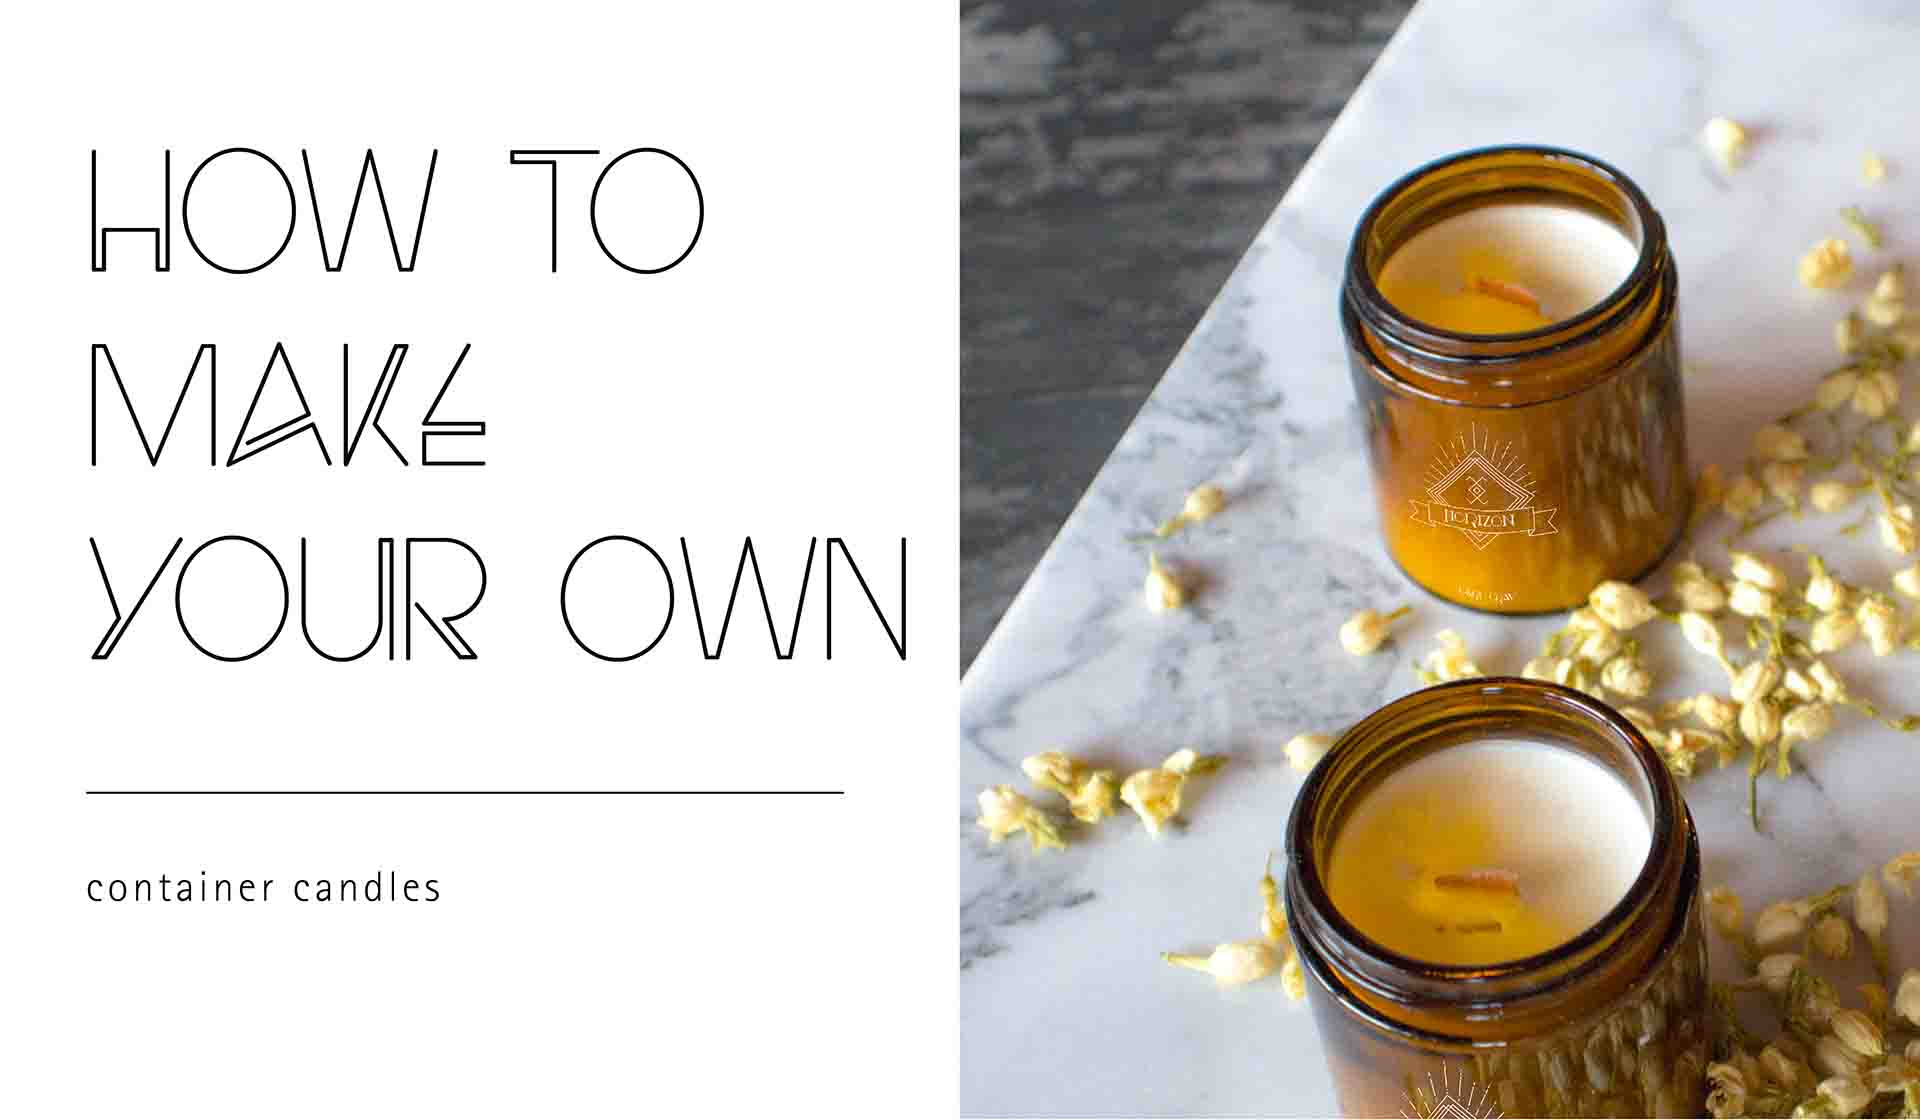 How to Make Your Own Container Candles